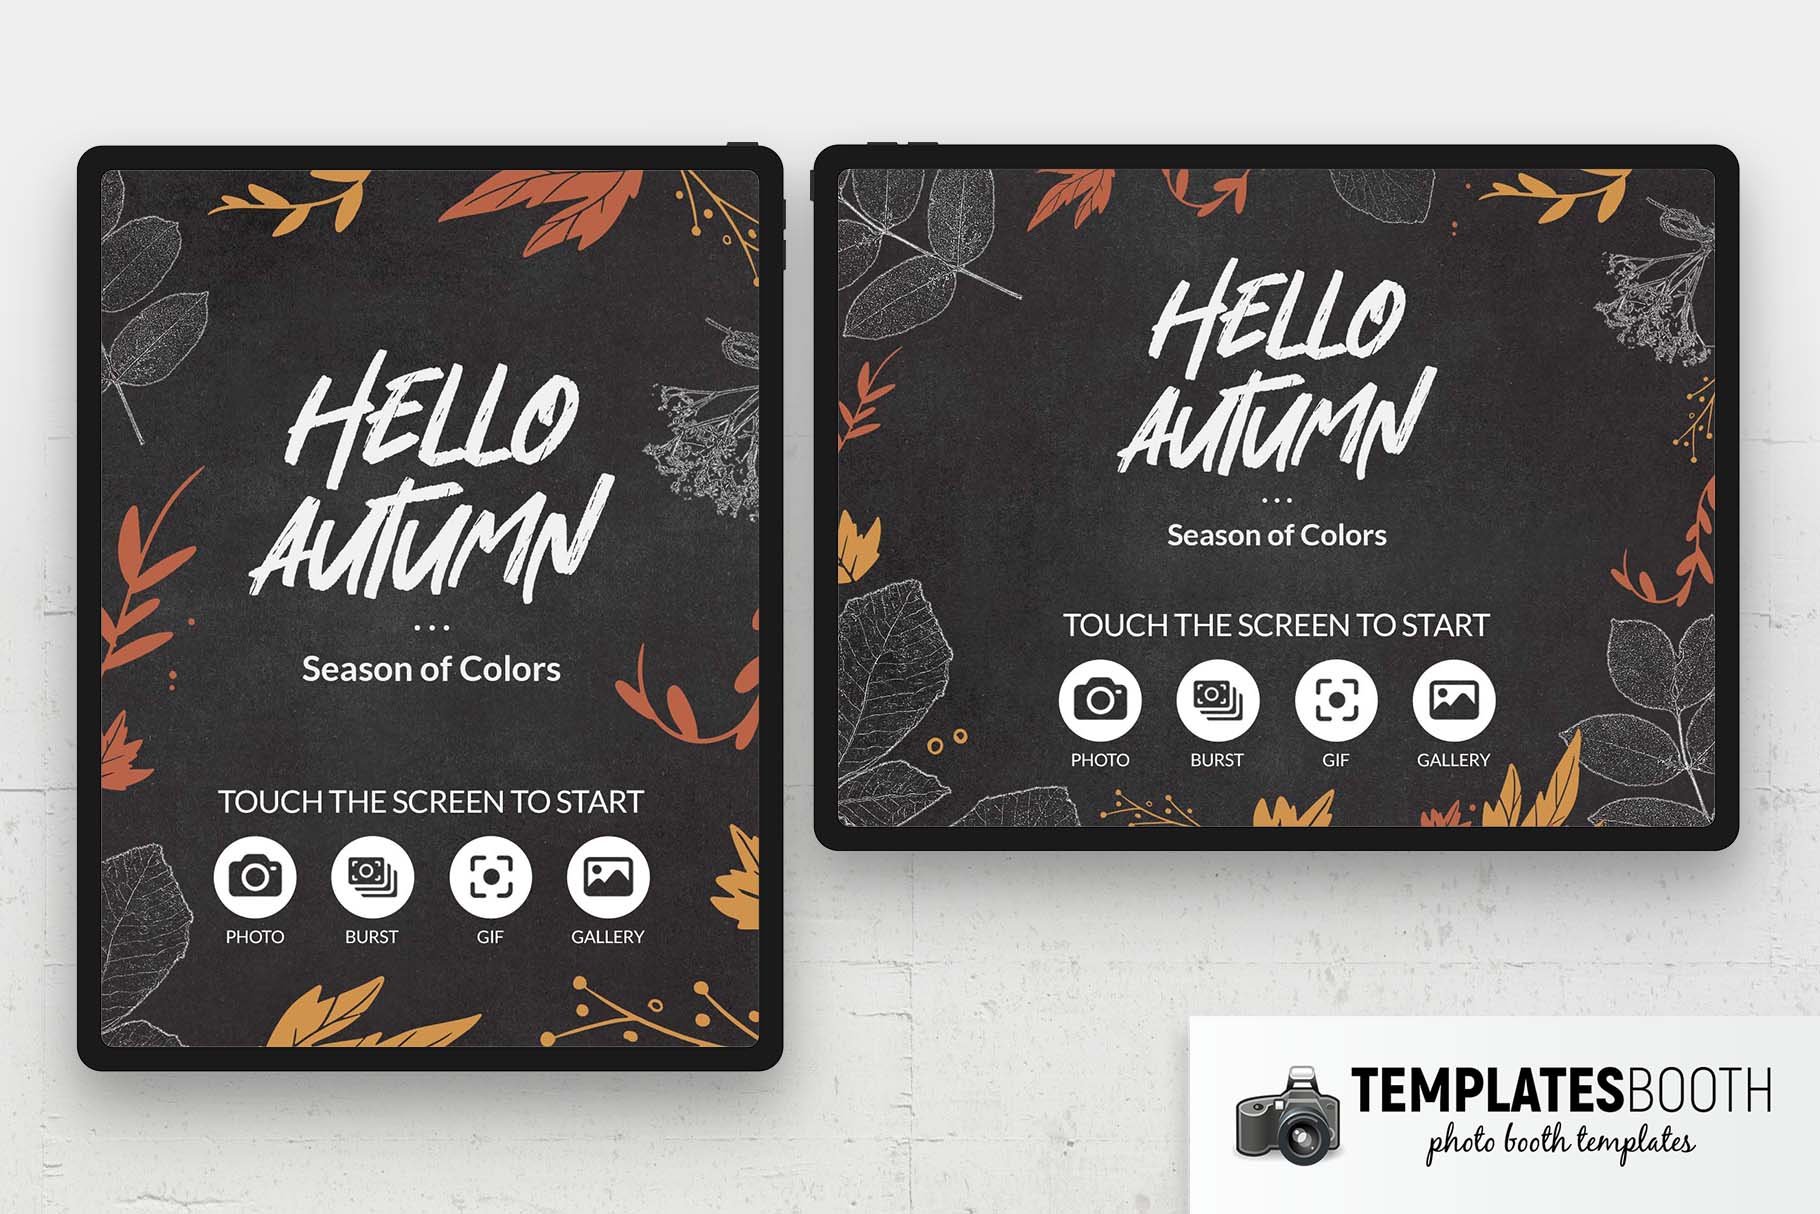 Free Autumn Photo Booth Welcome Screen